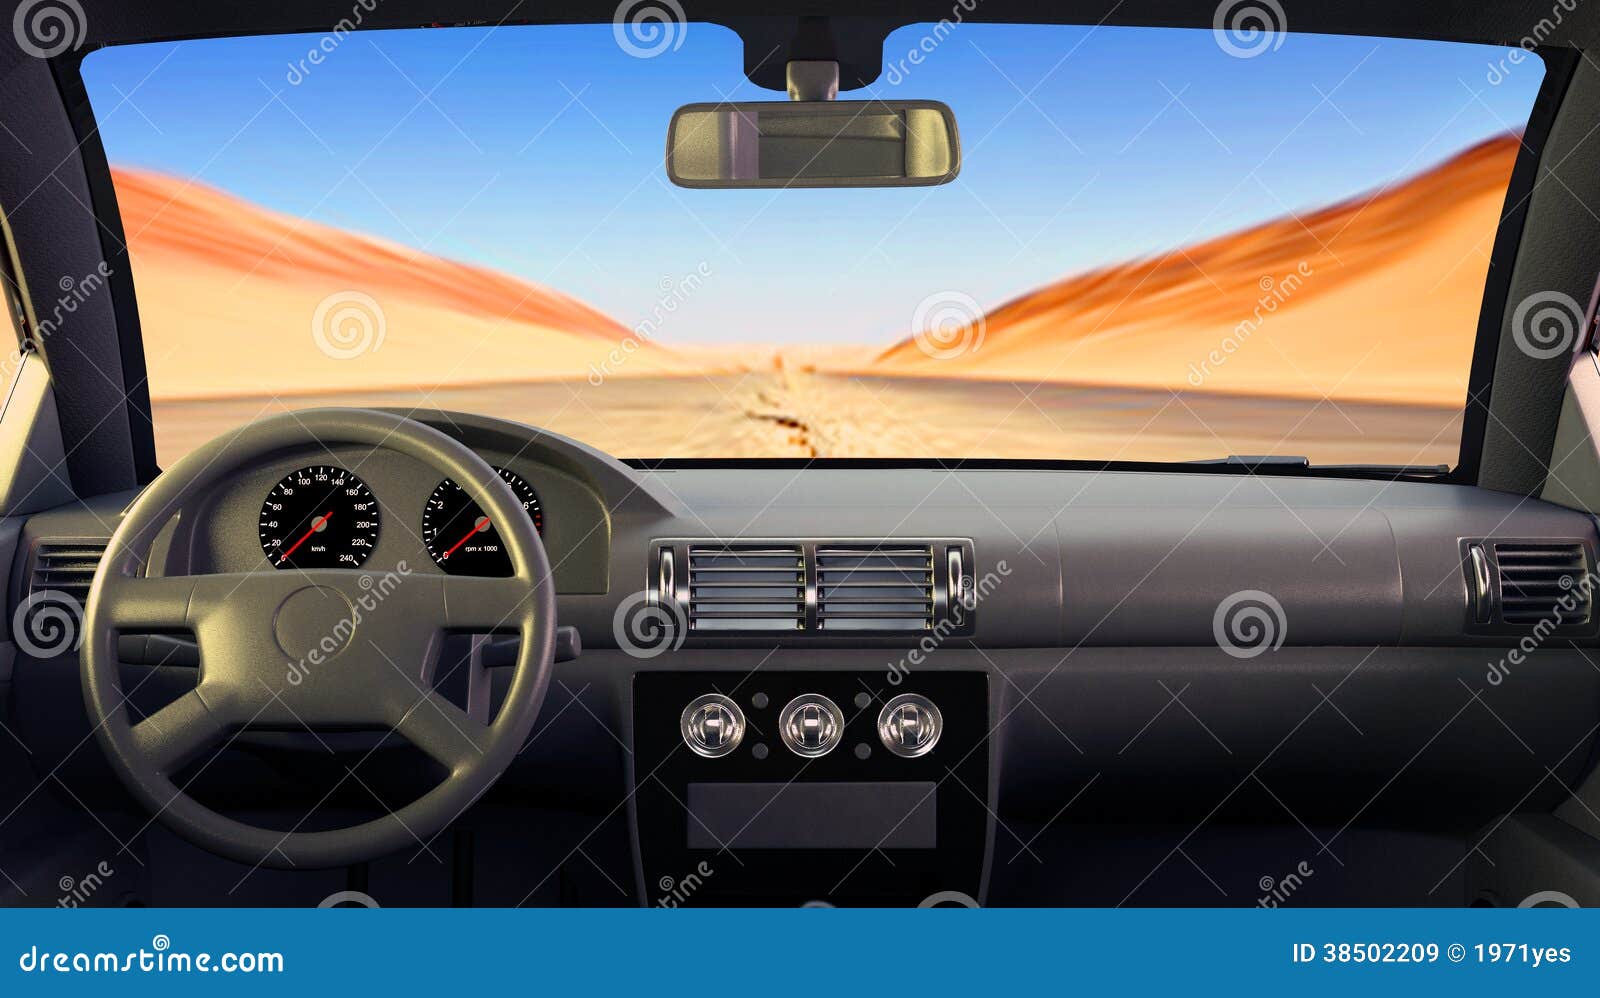 The Car Inside. Royalty Free Stock Images - Image: 38502209